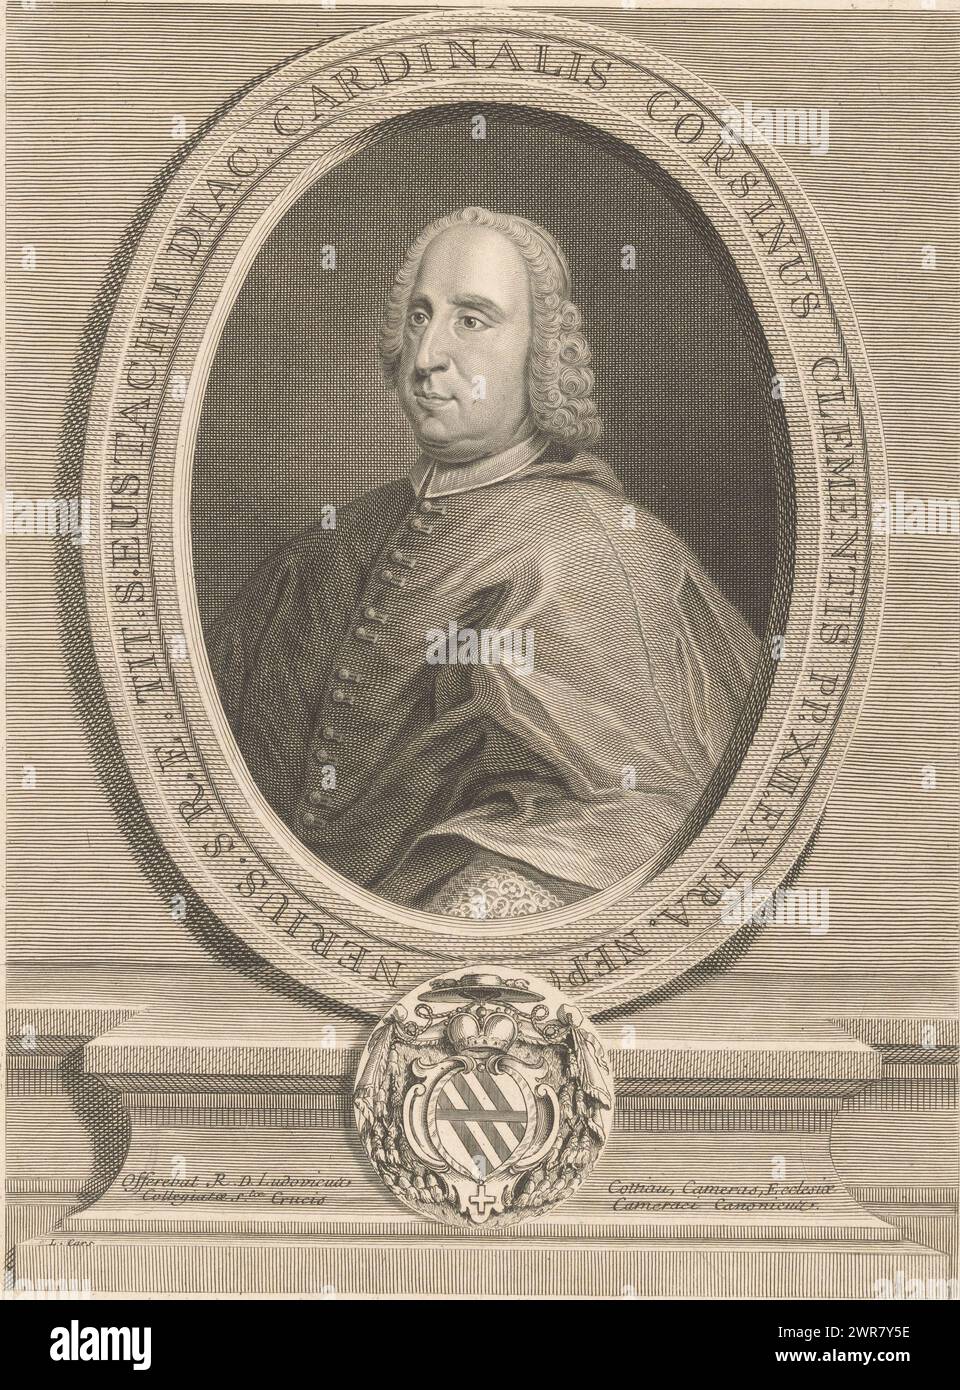 Portrait of Cardinal Lorenzo Corsini, later Pope Clement XII, print maker: Laurent Cars, after design by: Johann Georg Wille, publisher: Ludovicus Cottiau, France, 1725 - 1771, paper, engraving, etching, height 298 mm × width 221 mm, print Stock Photo